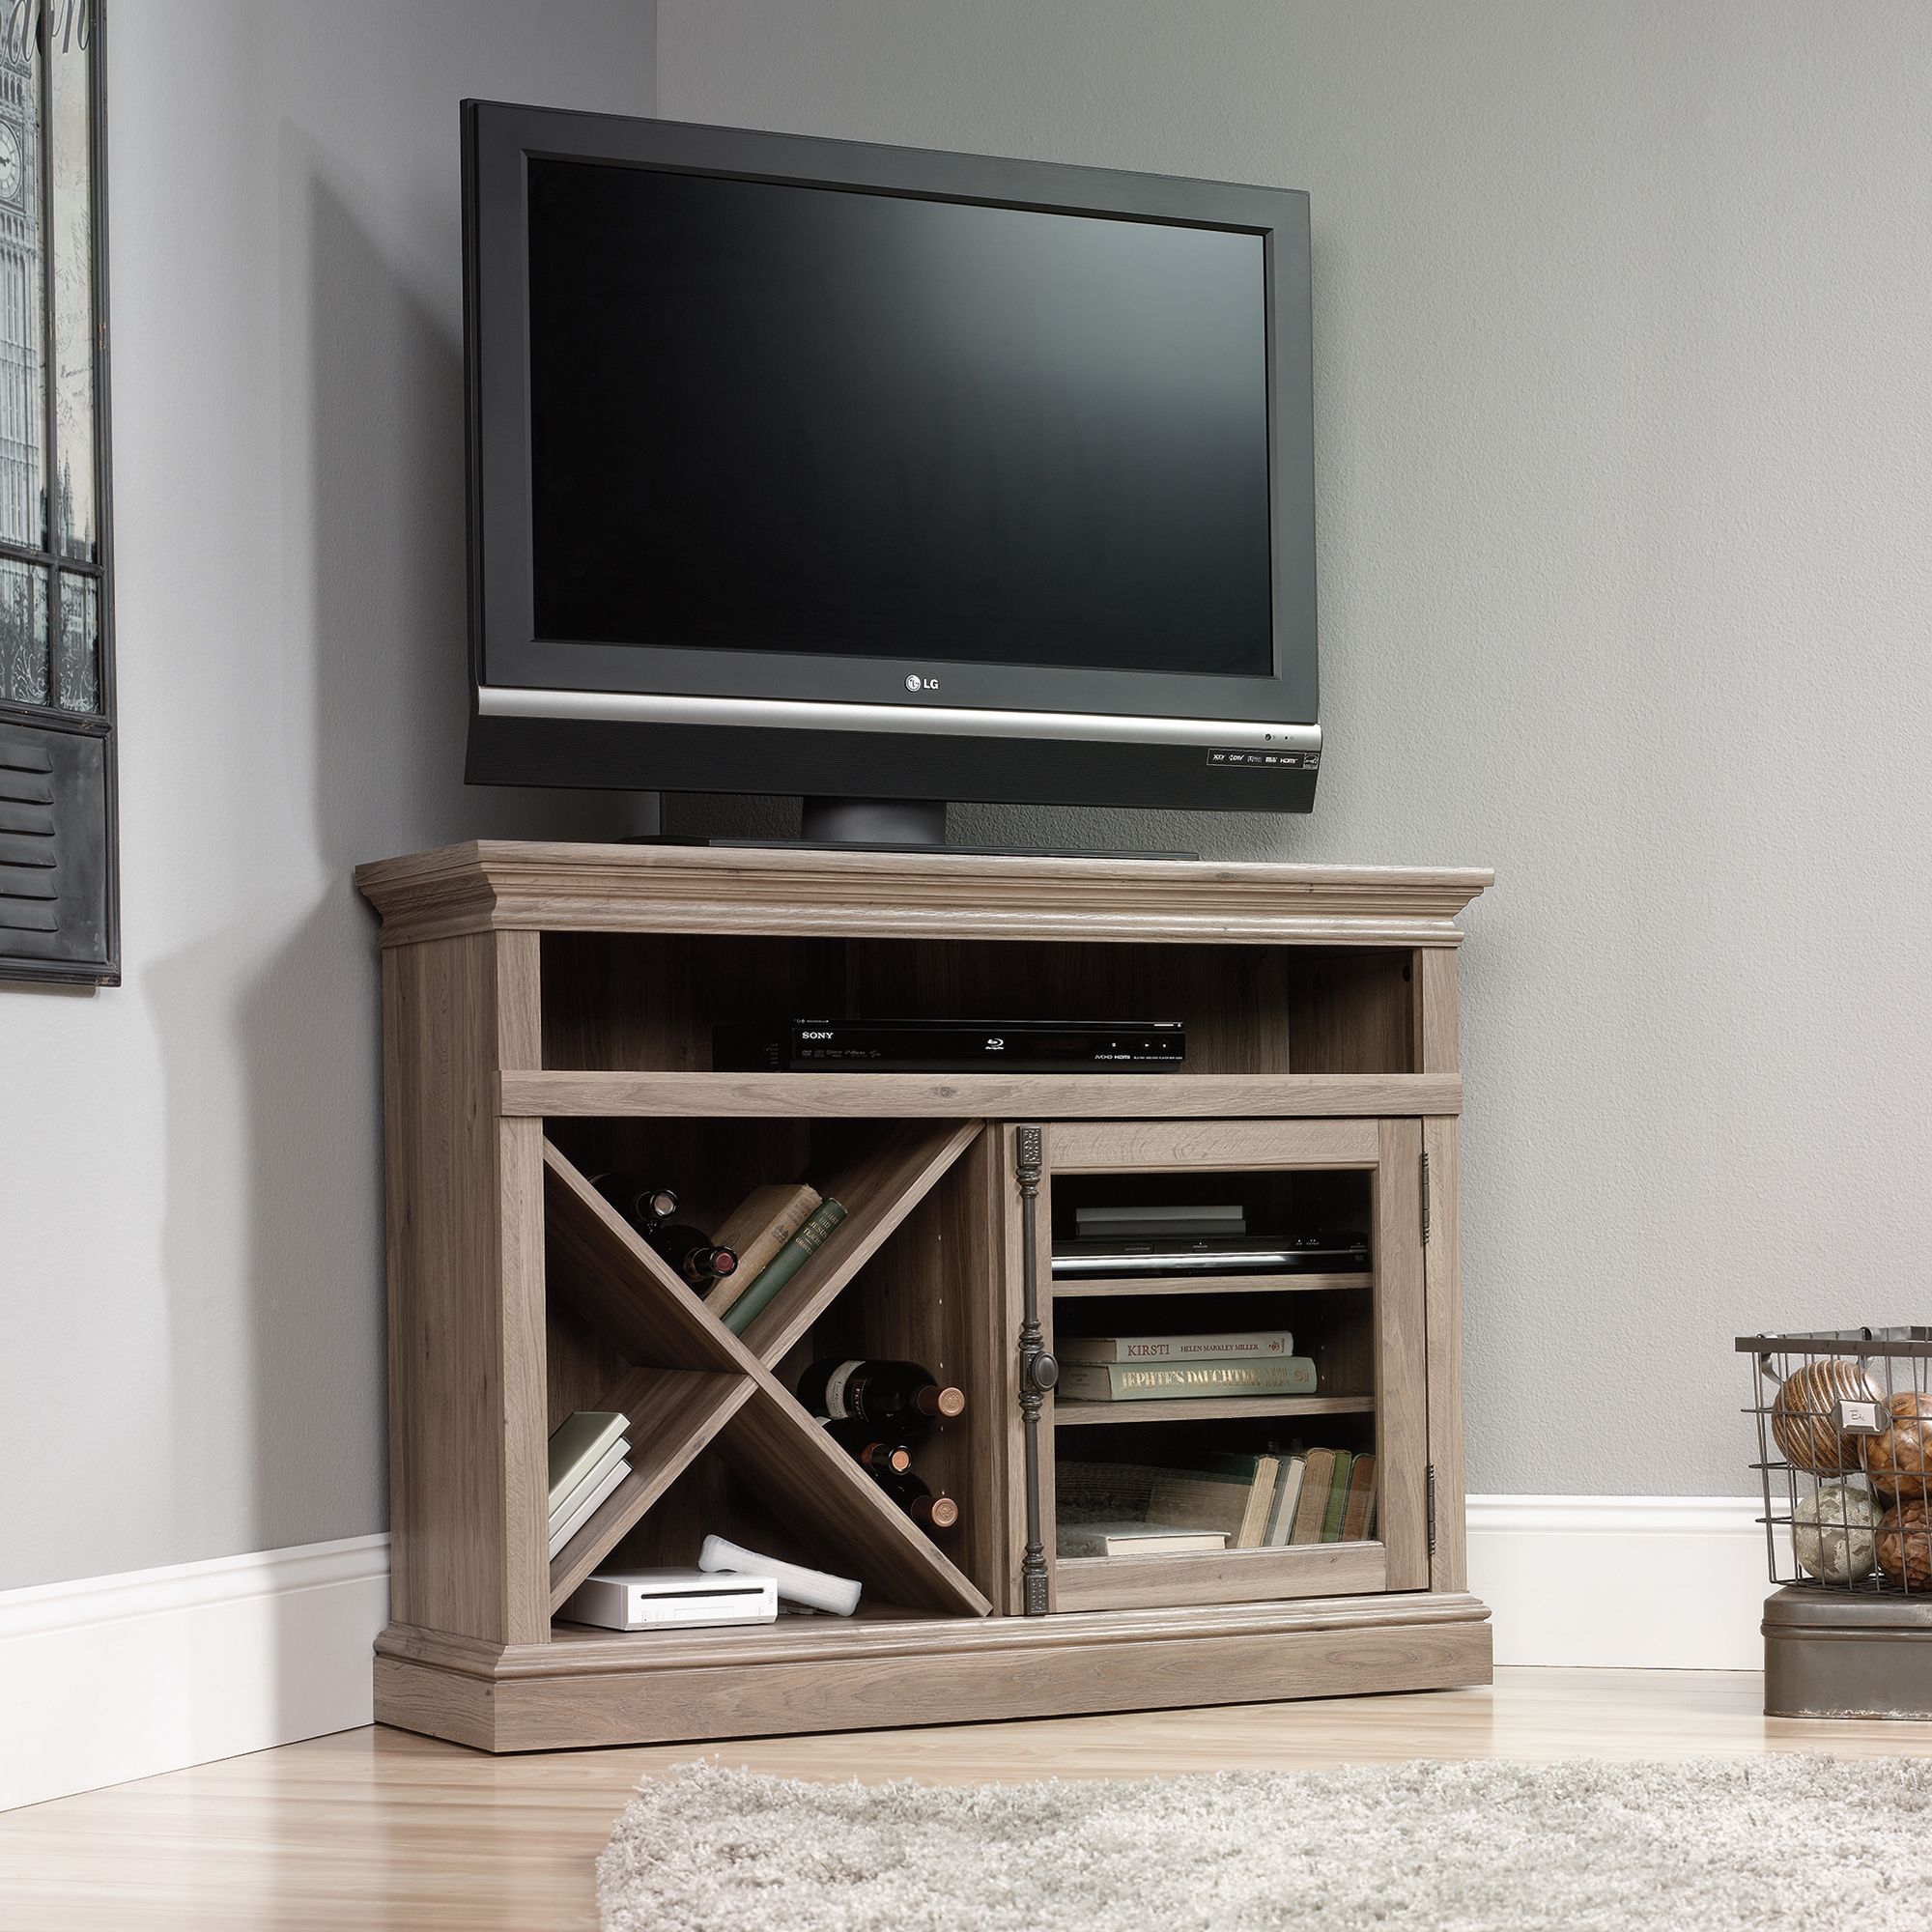 Sauder Corner Tv Stand (414729) – The Furniture Co. For Space Saving Black Tall Tv Stands With Glass Base (Photo 6 of 15)